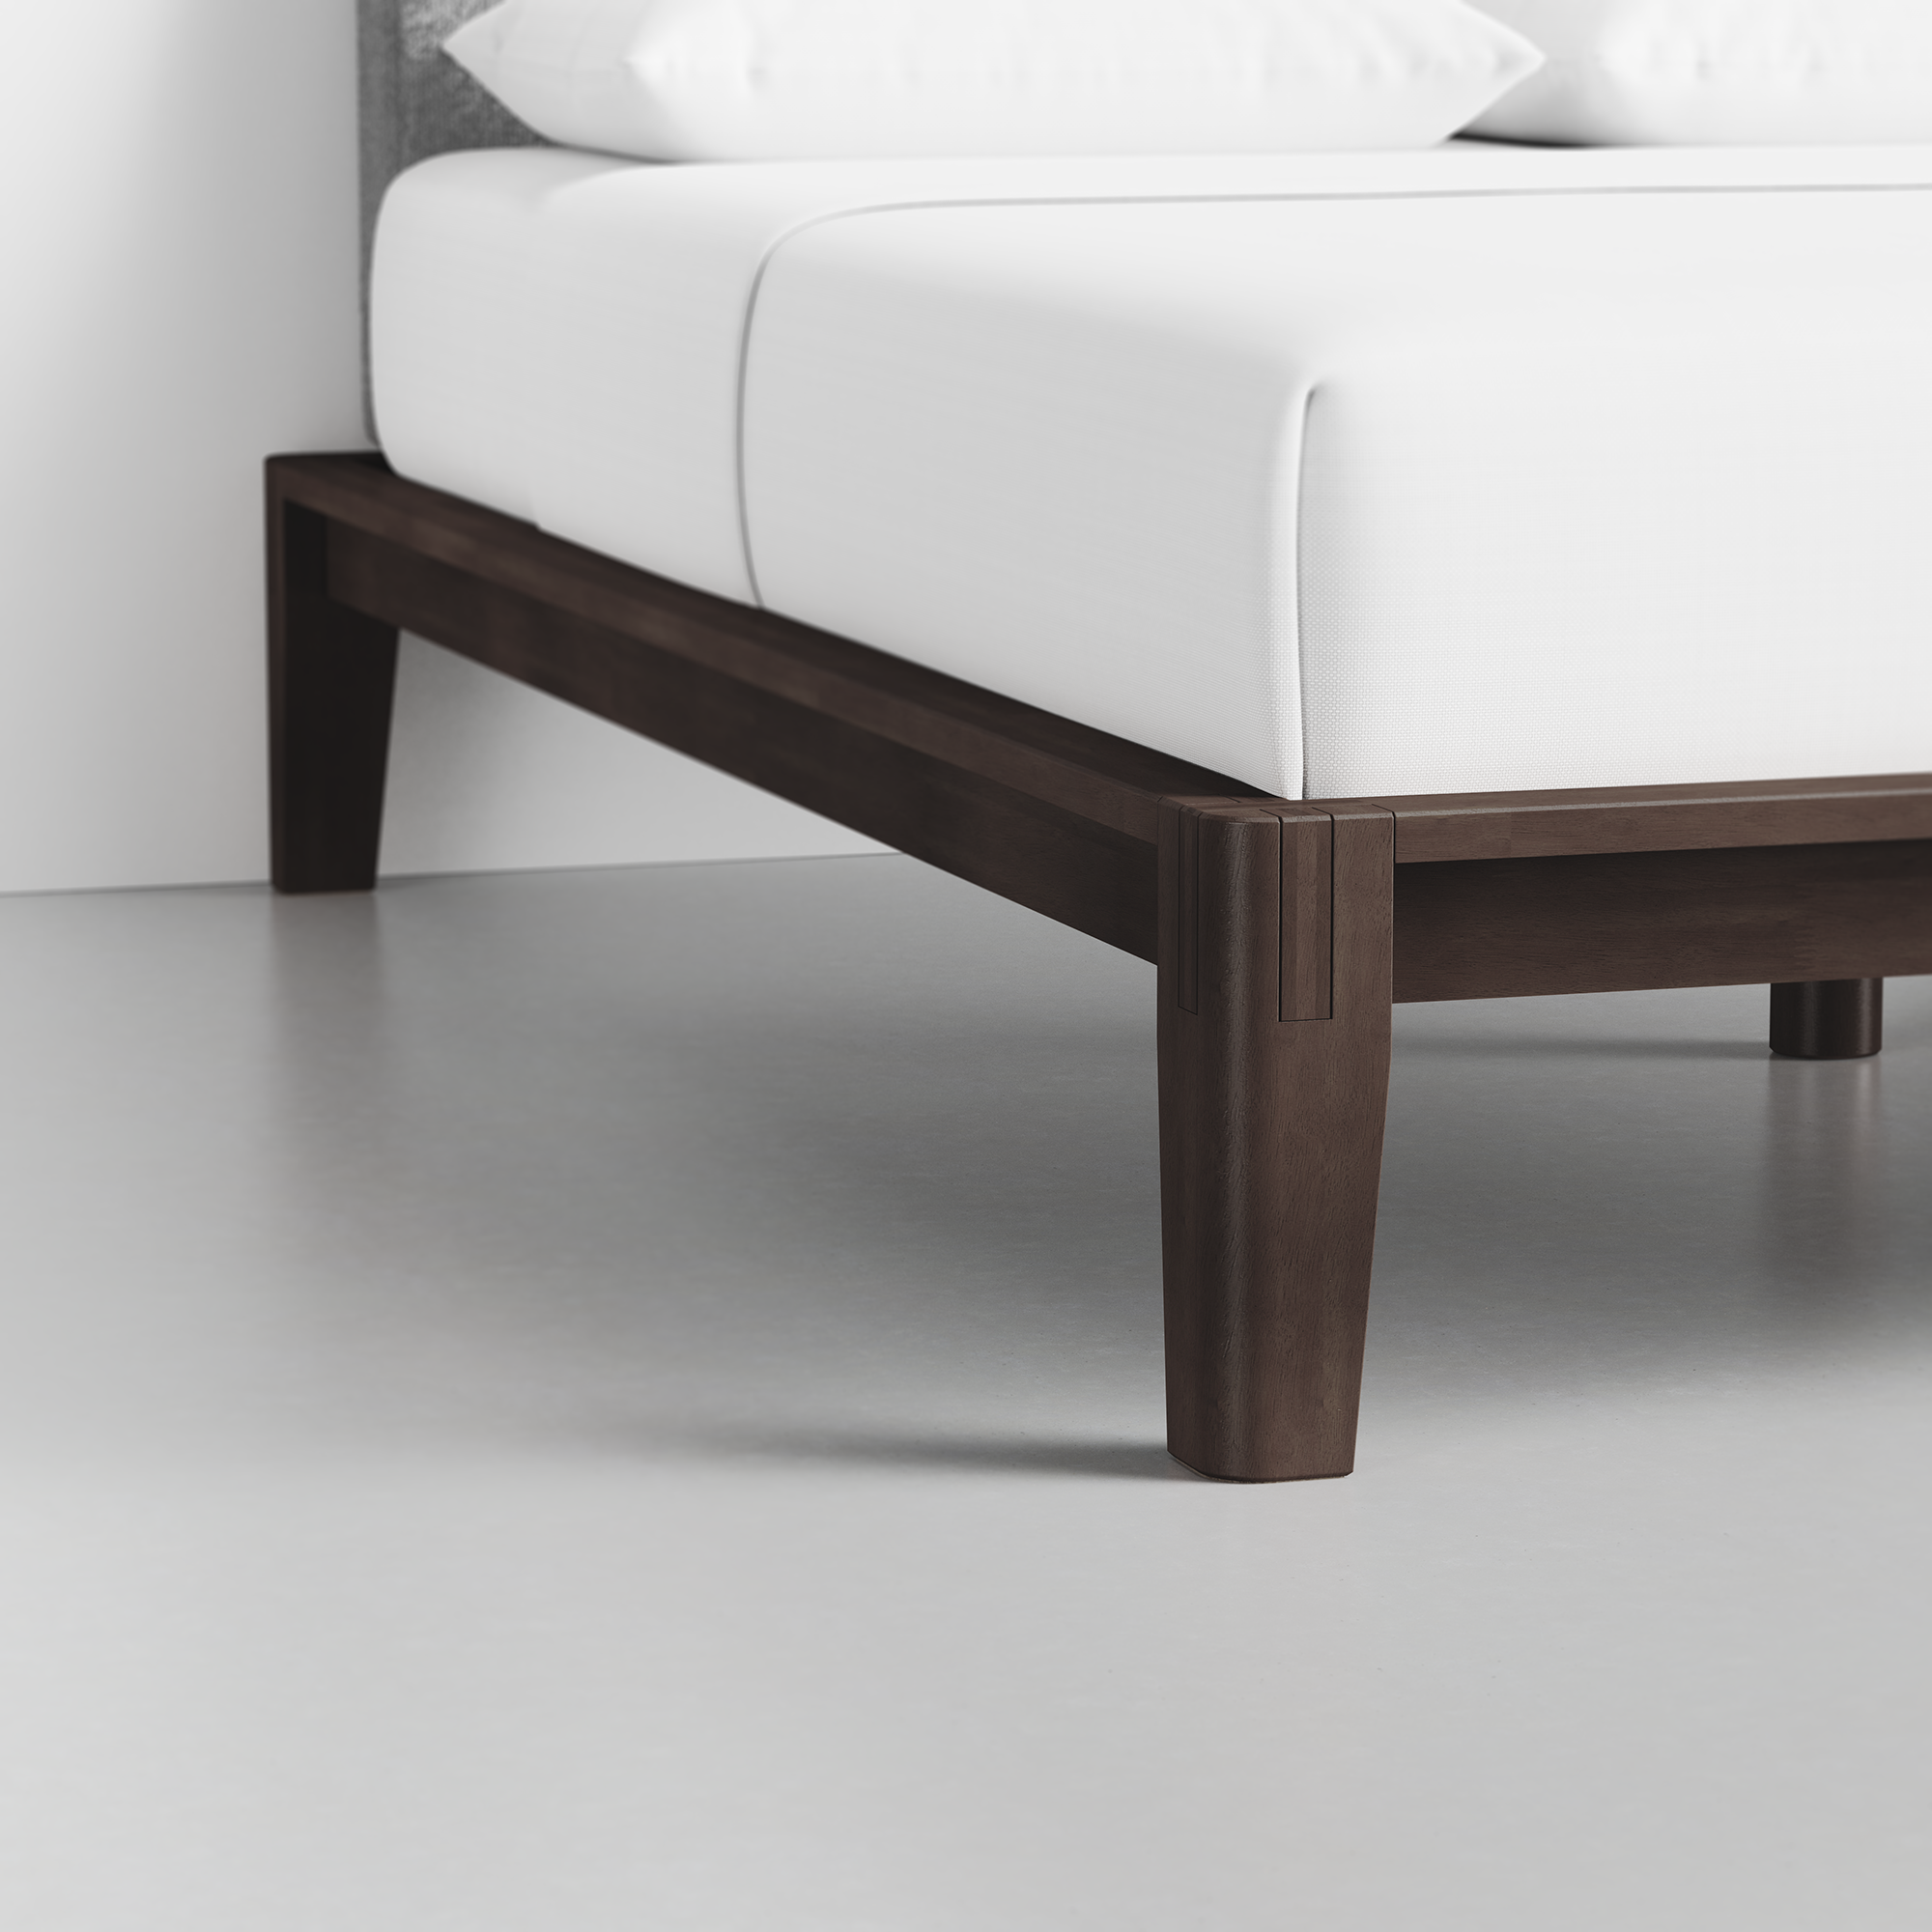 The Bed (Espresso / Pewter) - Render - Foot Detail